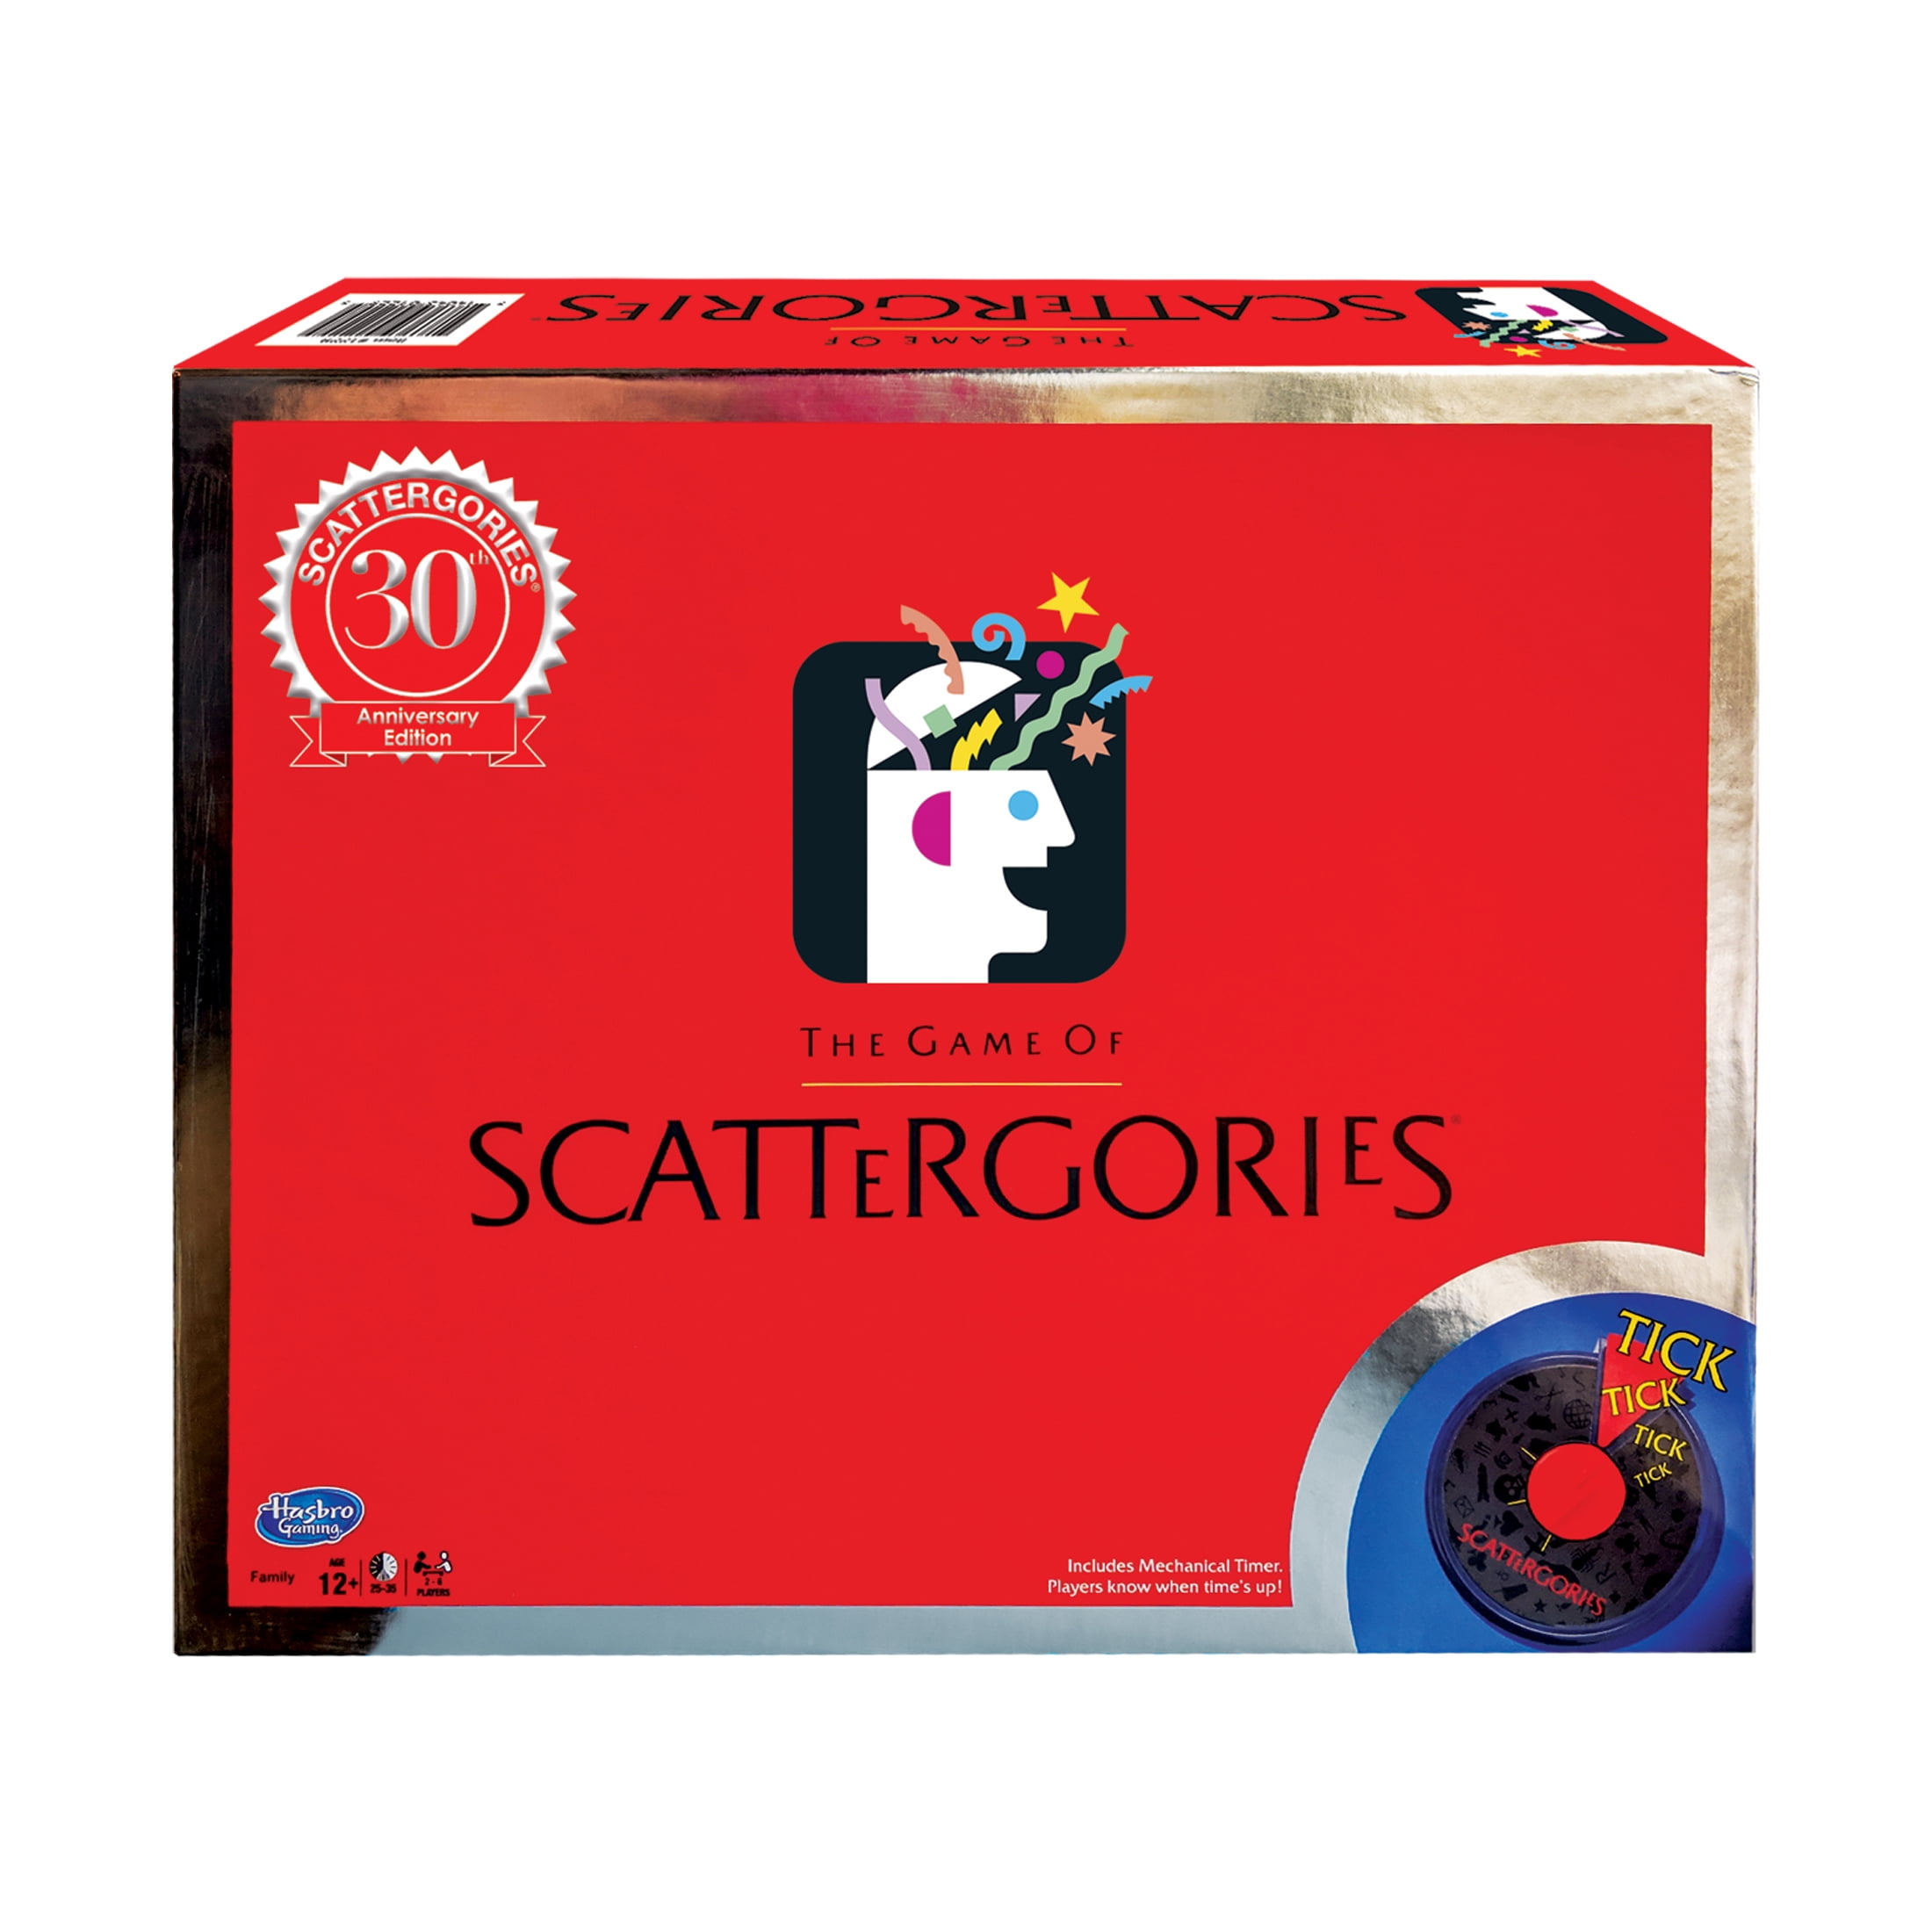 Scattergories Hasbro Gaming 2013 Interactive Board Game A5226 for sale online 